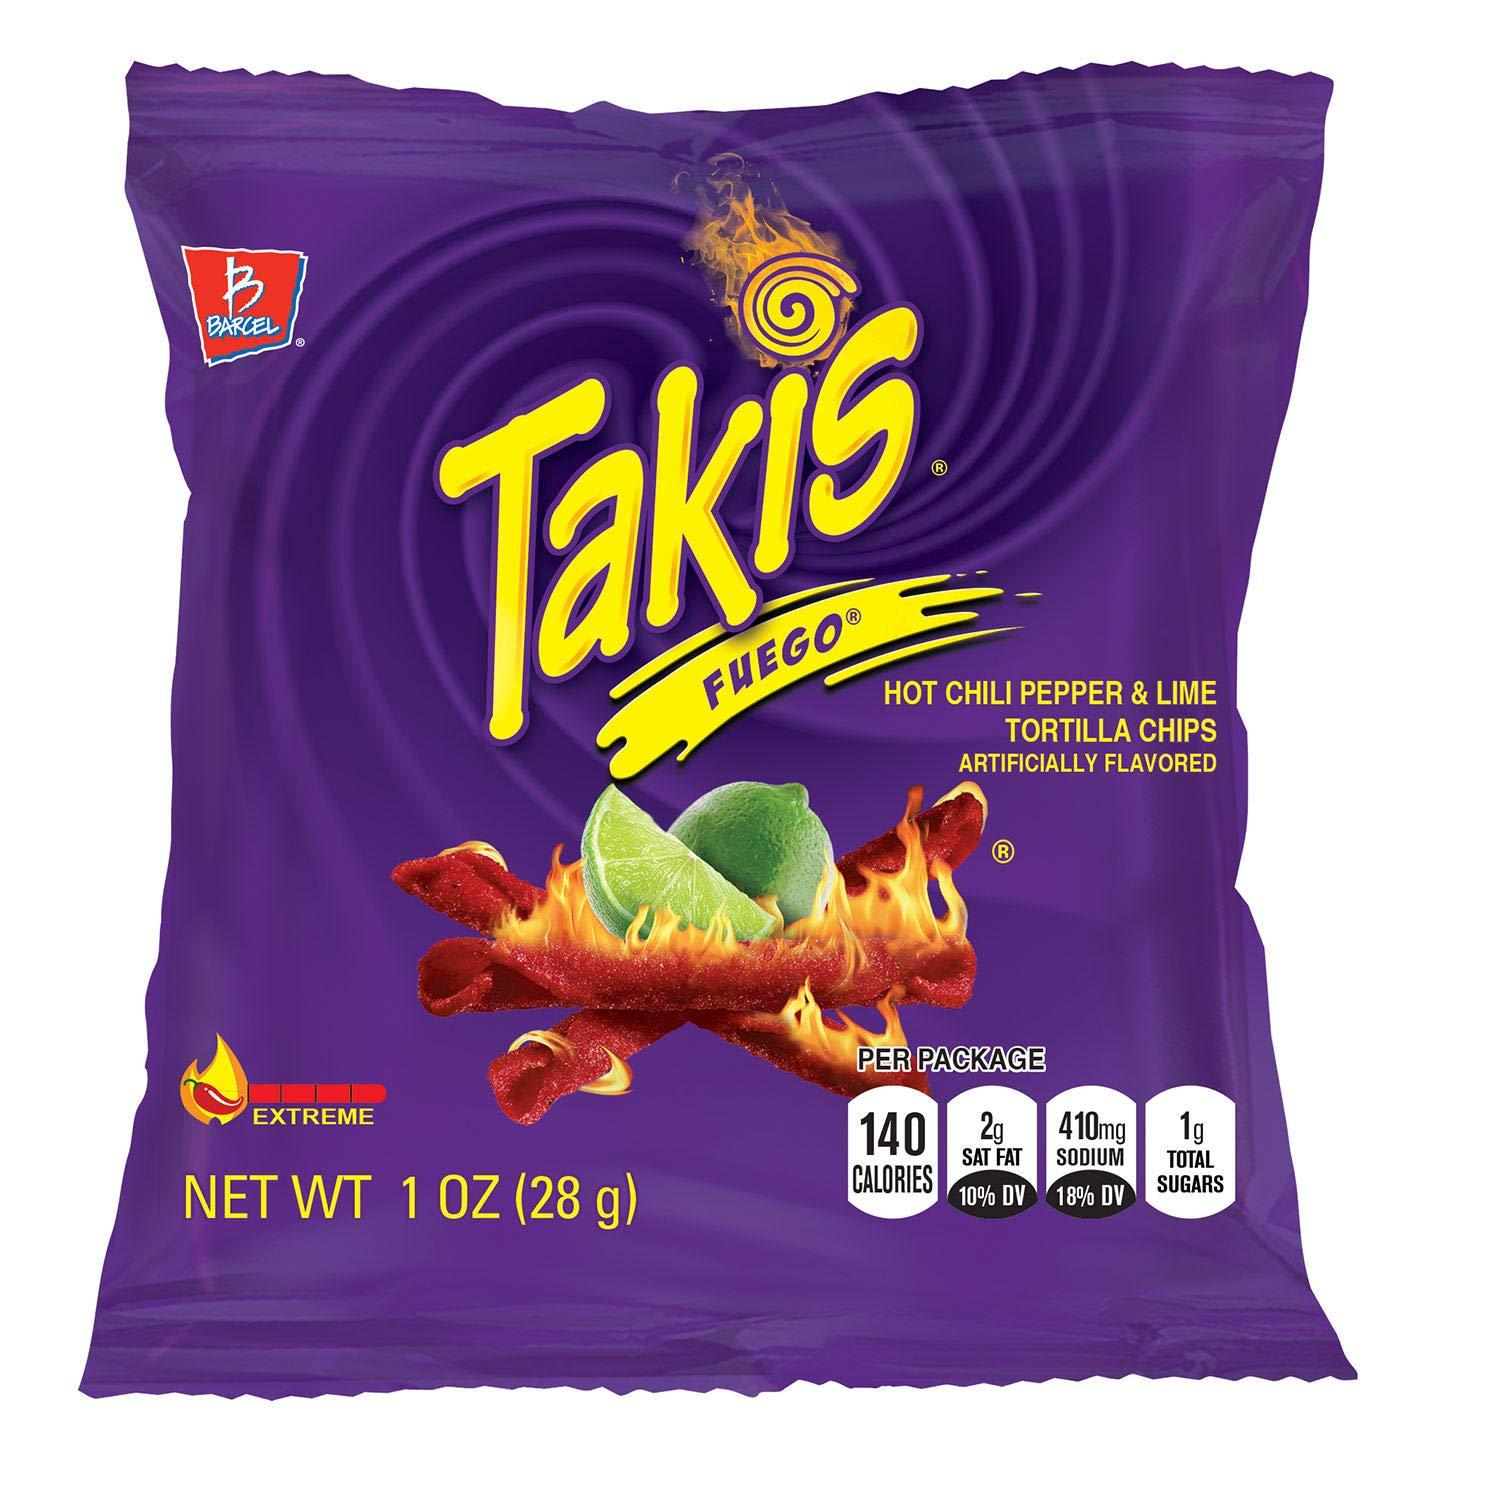 A Product of Takis Fuego (1 oz., 46 pk.) Fuego 1 Ounce (Pack of 46)